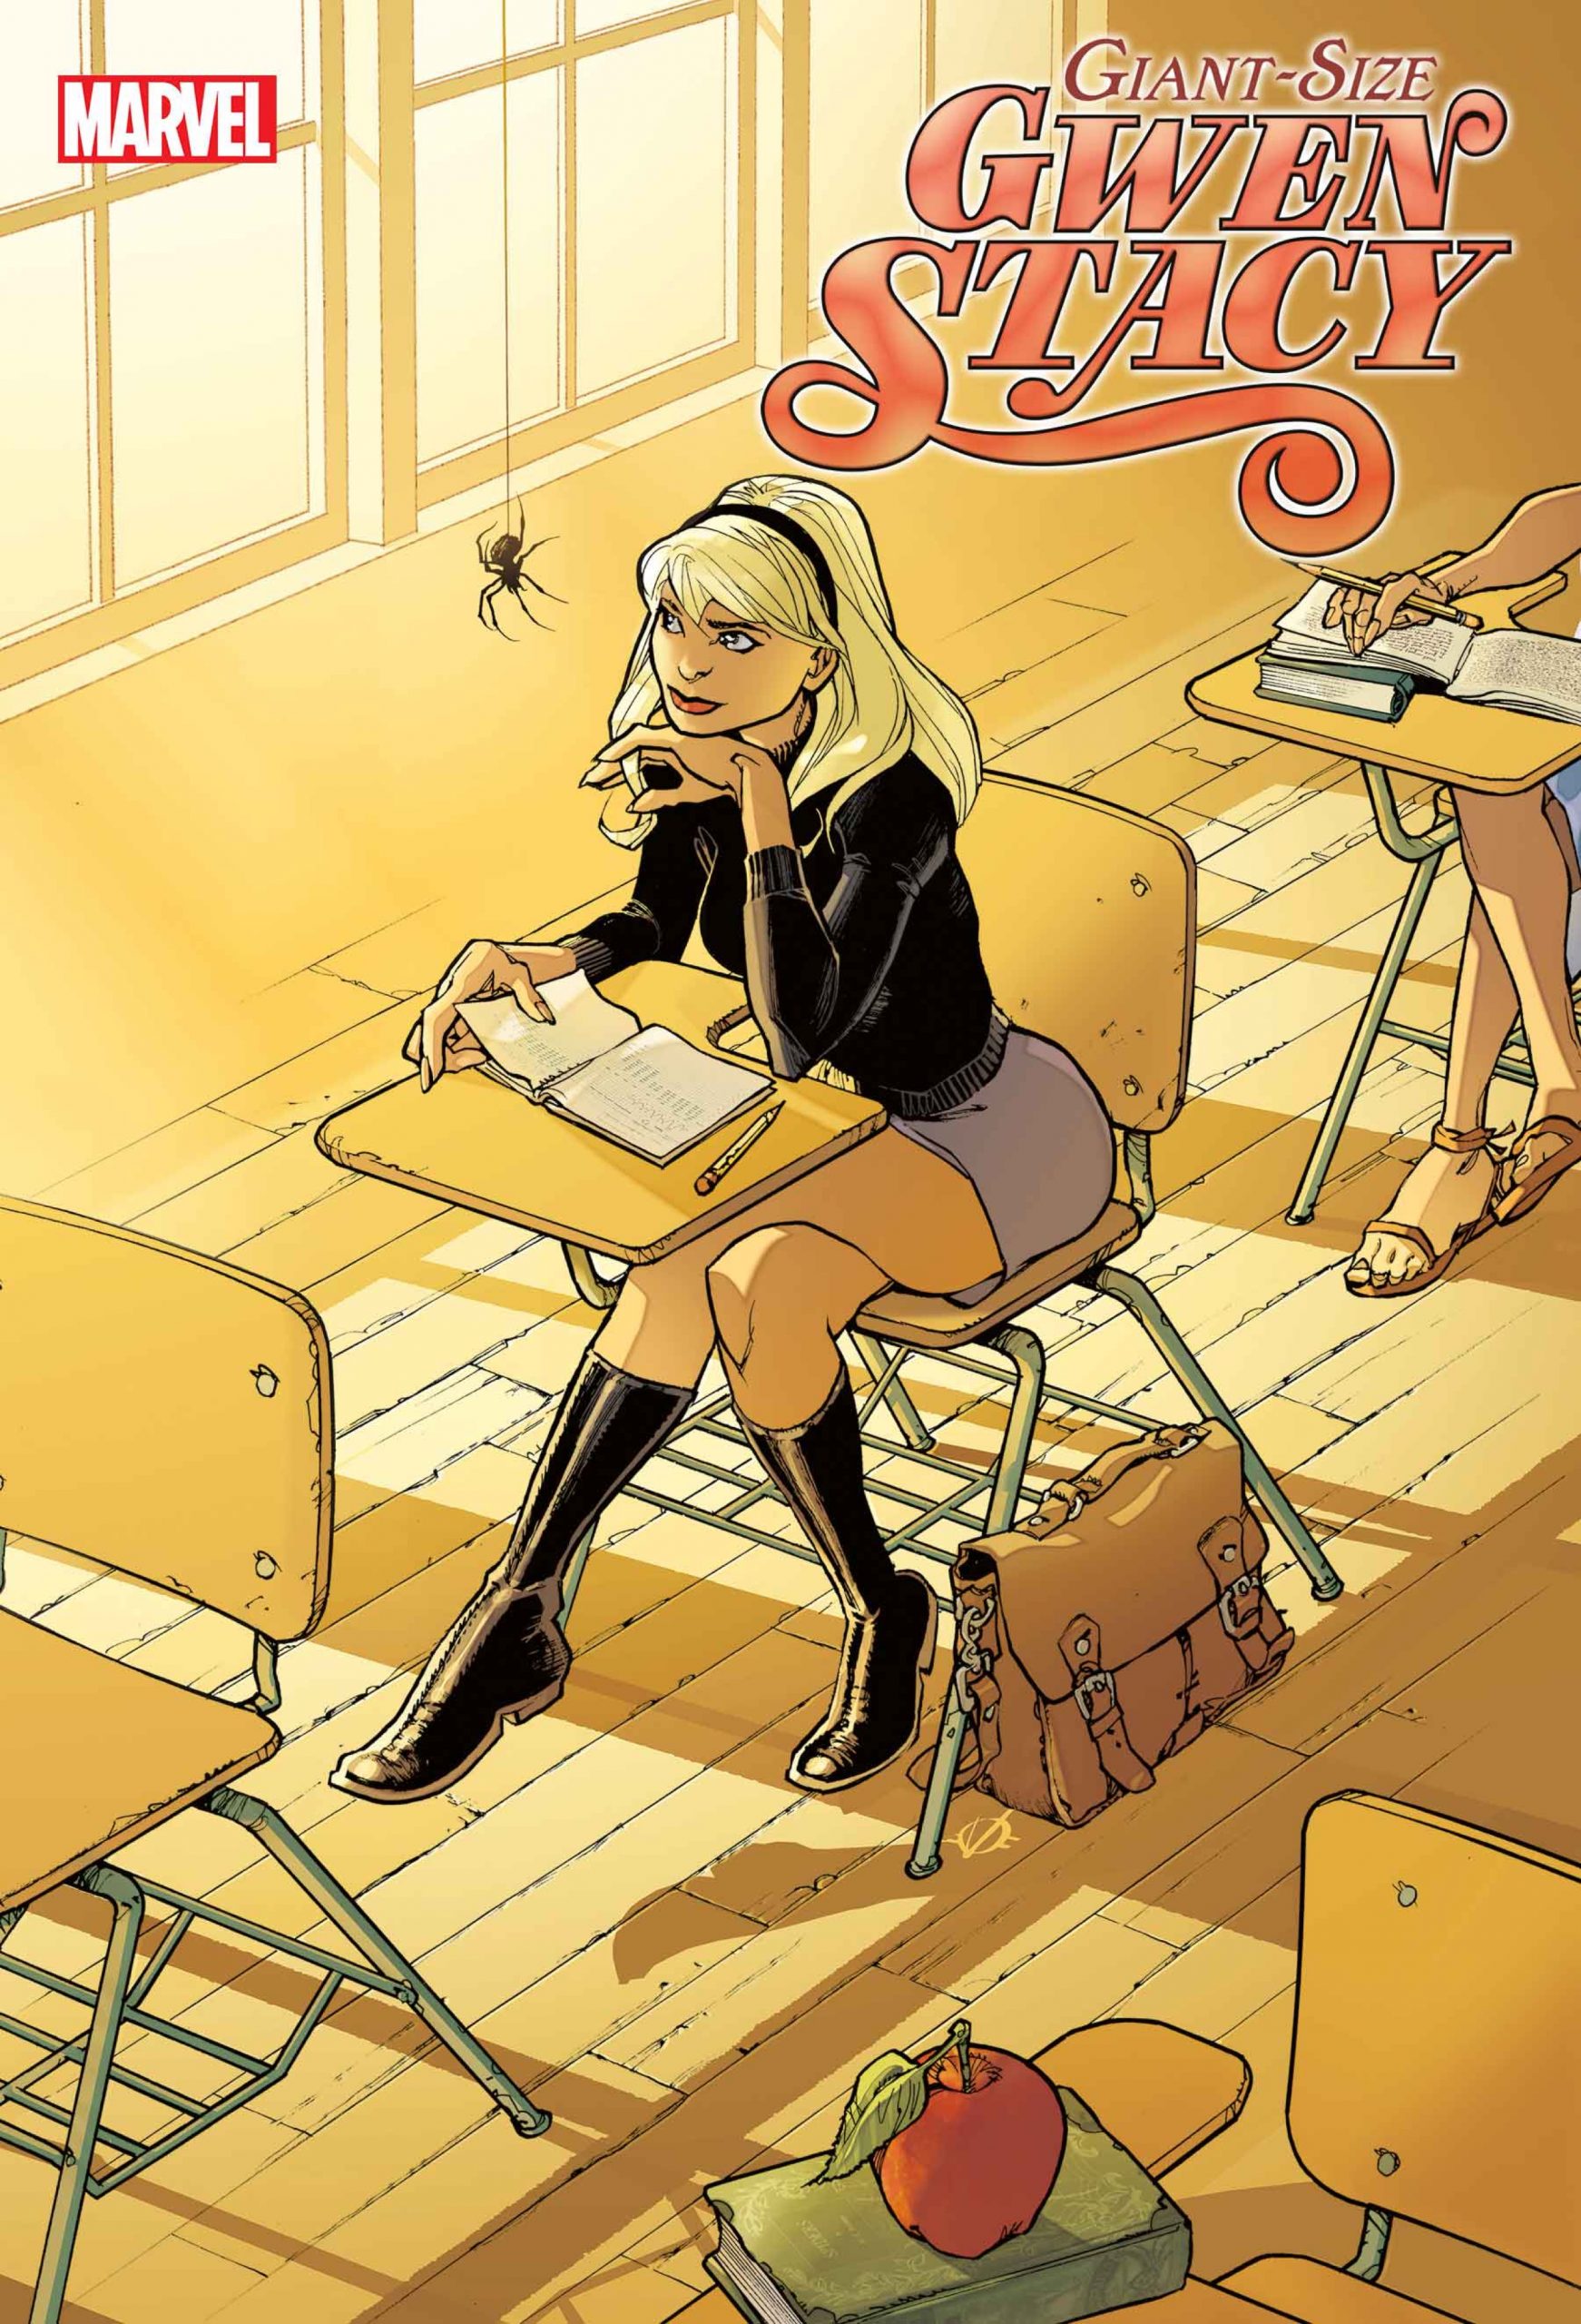 Marvel Preview: Giant-Size Gwen Stacy #1